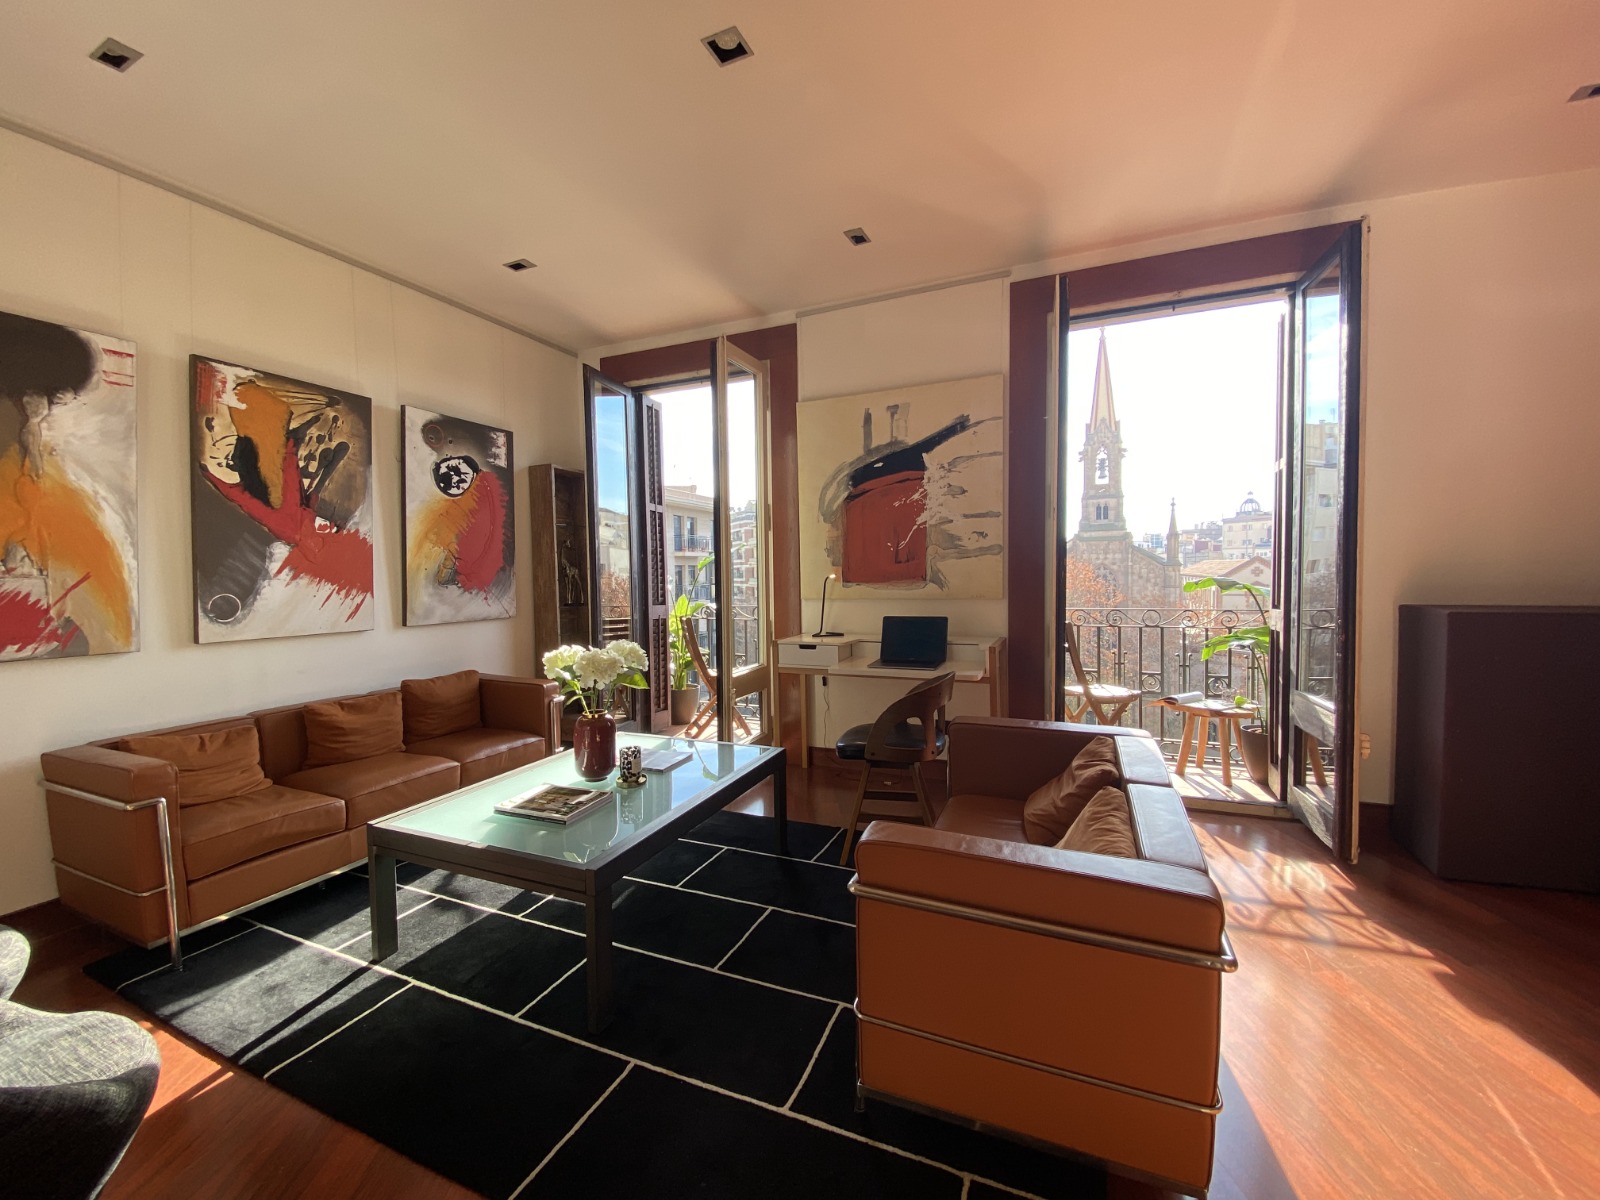 Apartment to rent in Barcelona By MyRentalHost